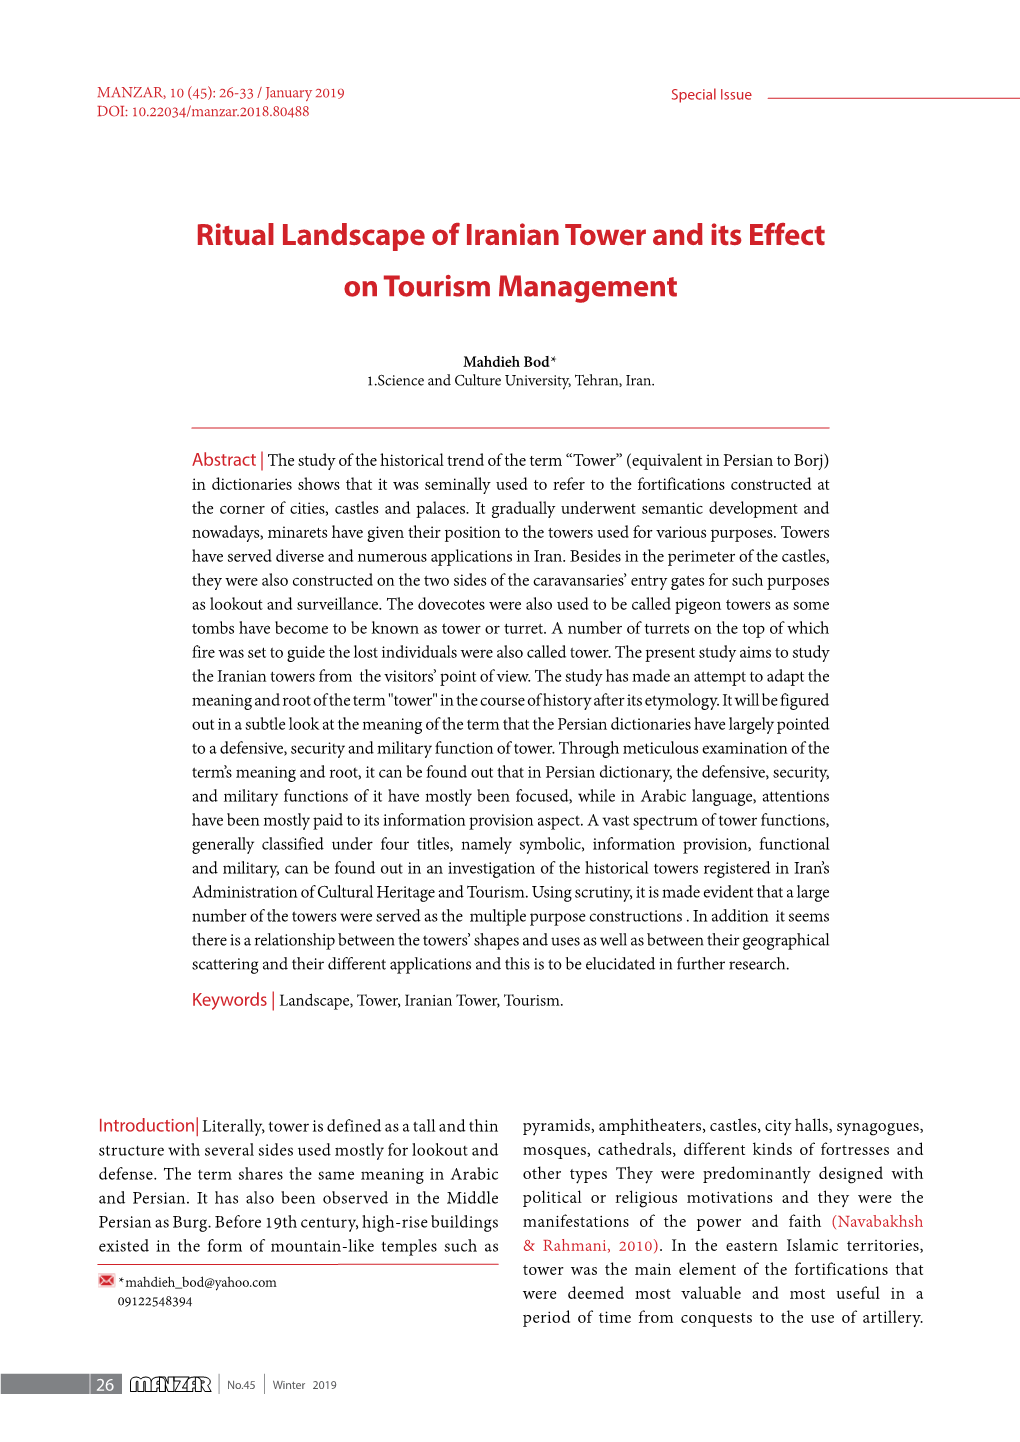 Ritual Landscape of Iranian Tower and Its Effect on Tourism Management